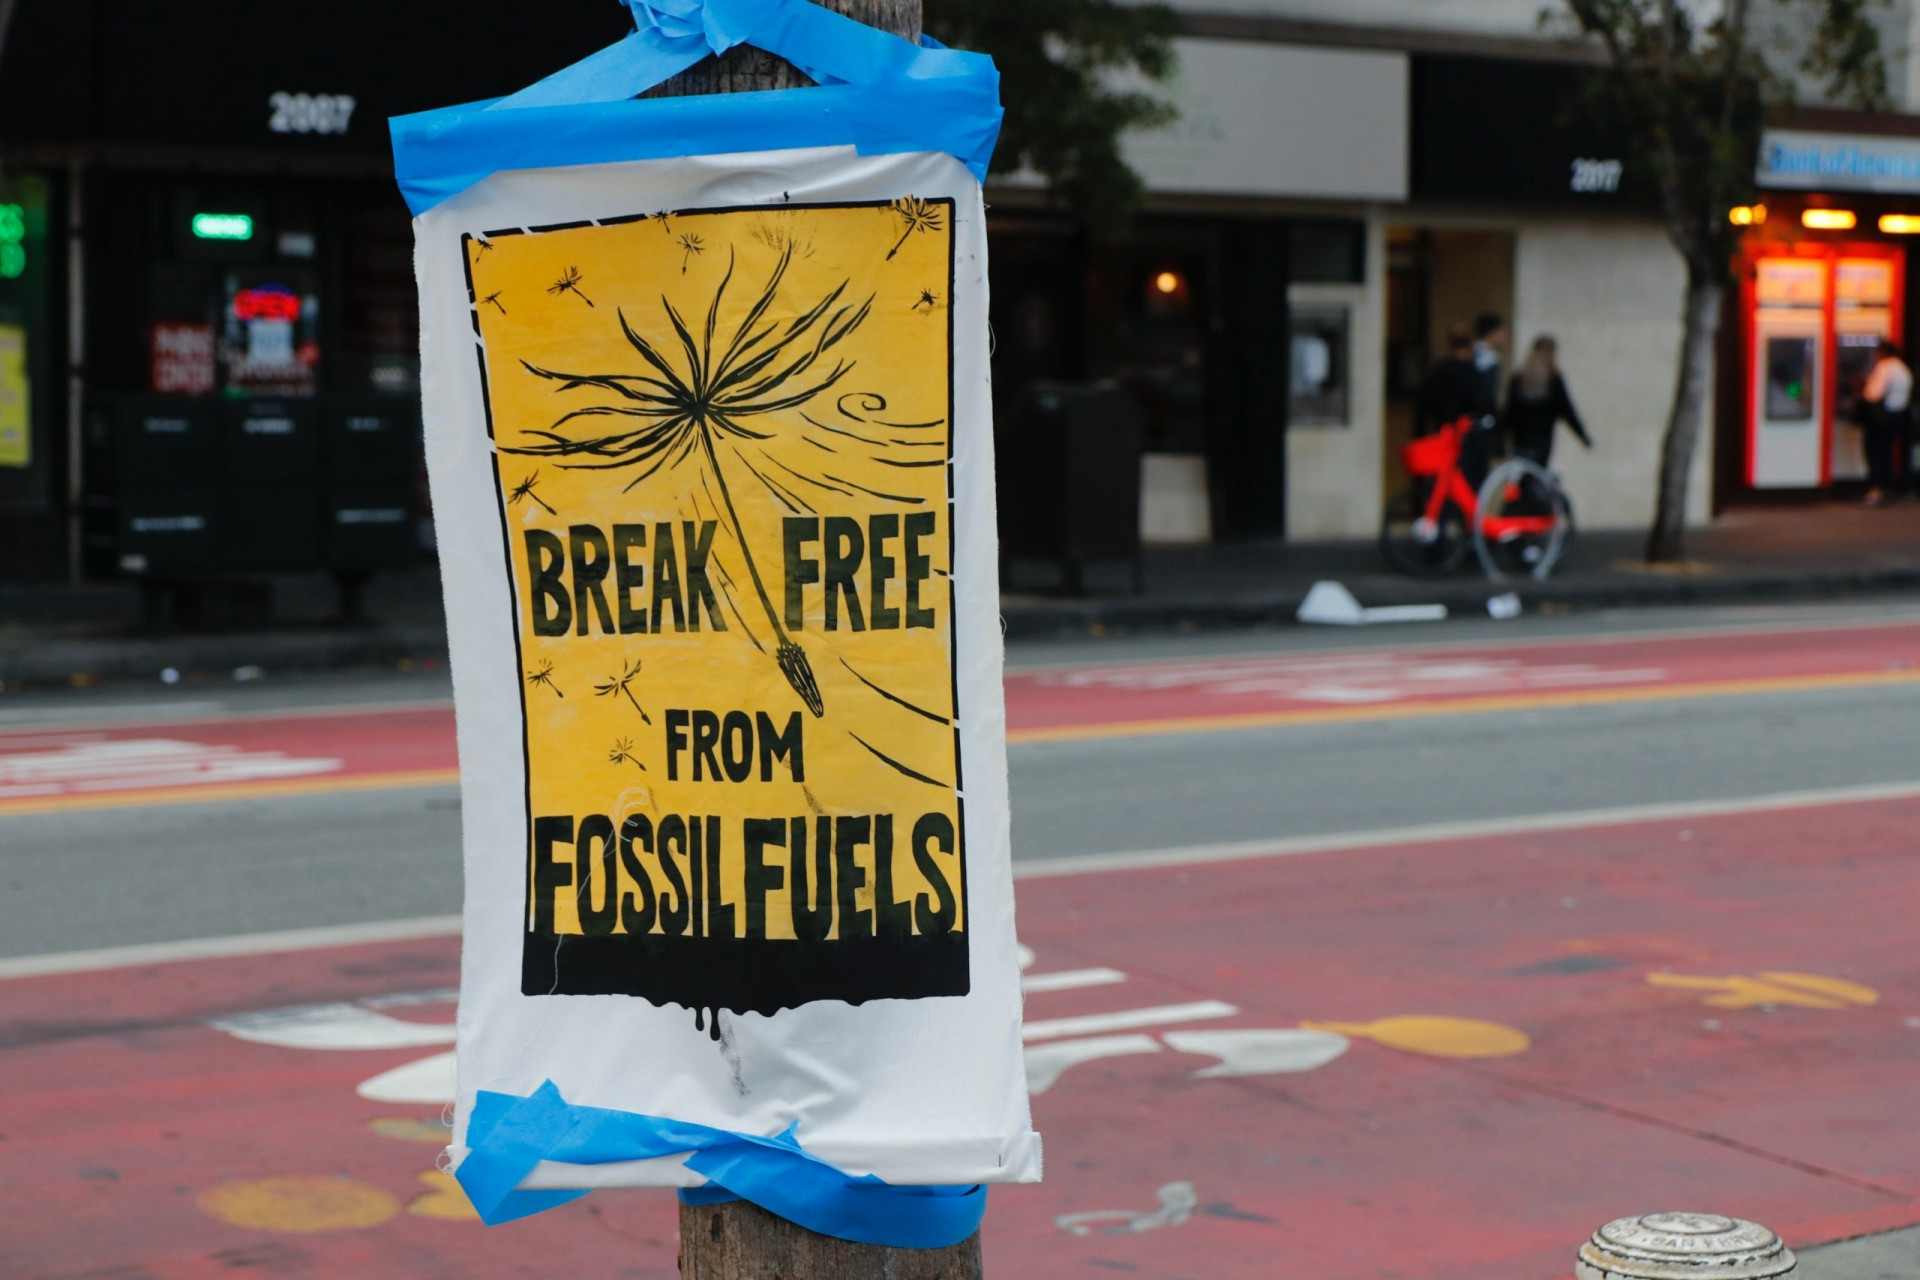 A poster saying "Break Free From Fossil Fuels"